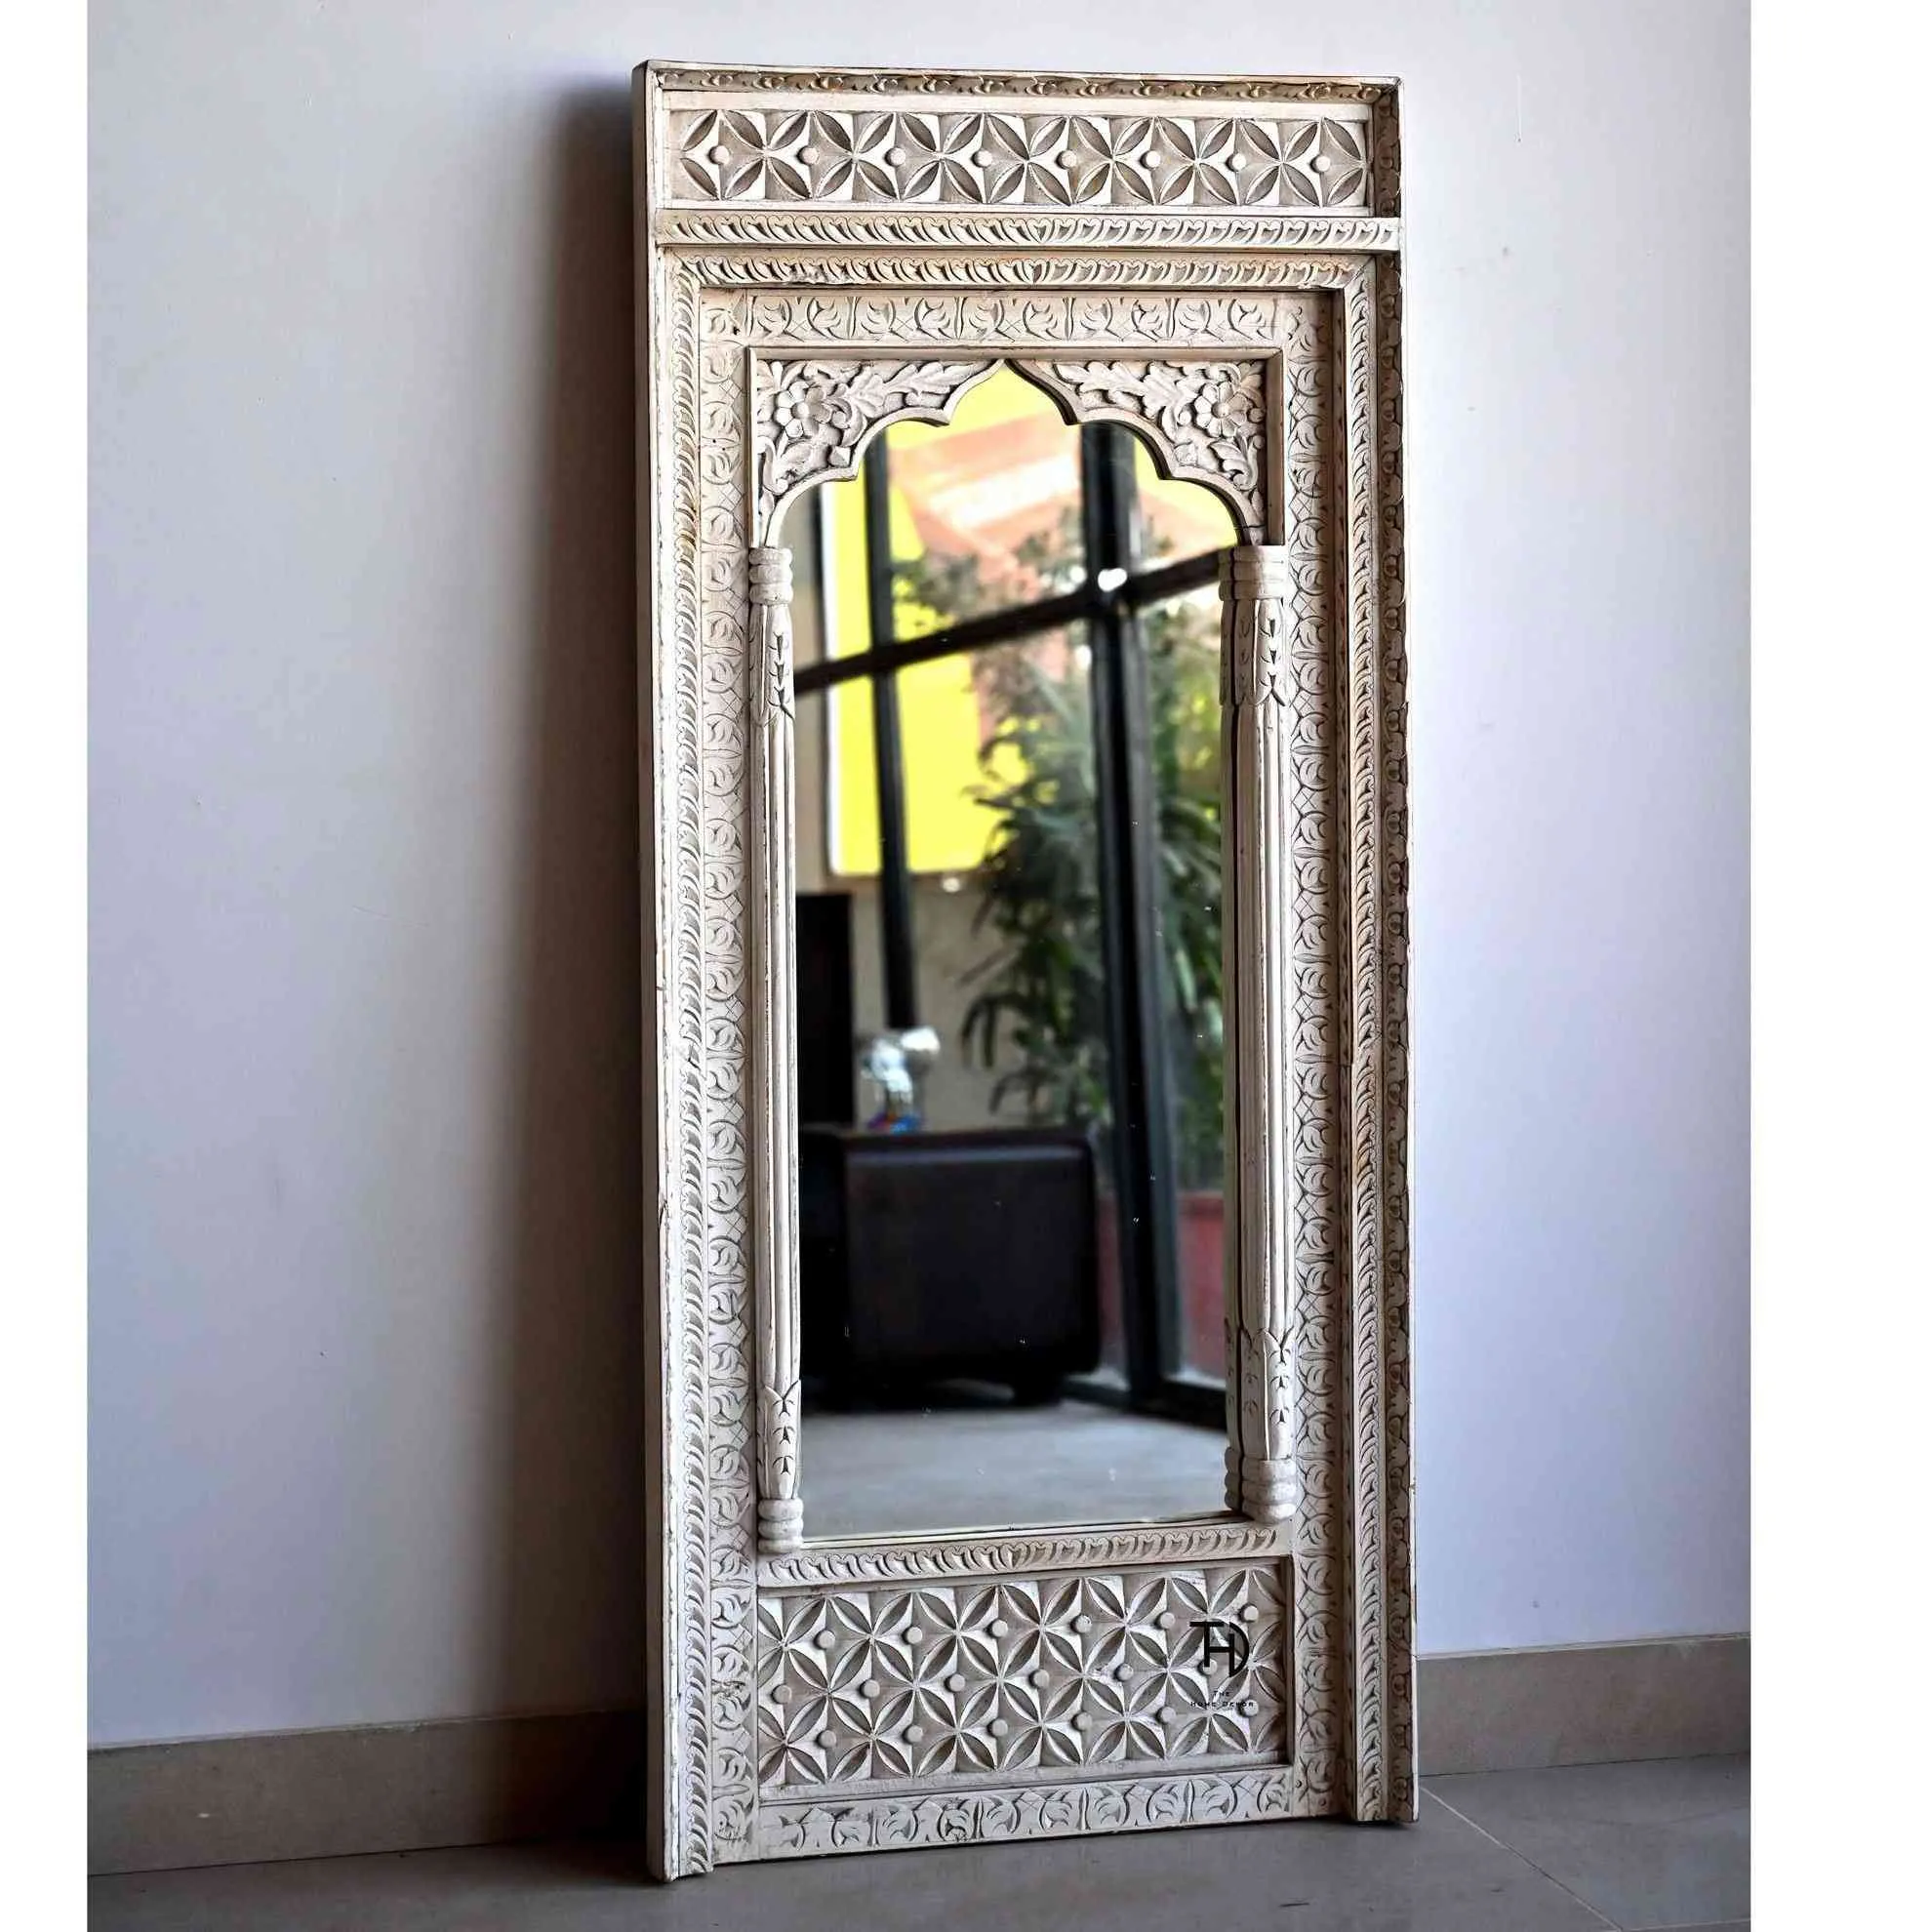 floor mirror, jharoka mirror frame, handmade frame intricated with detailing and craftsman،p